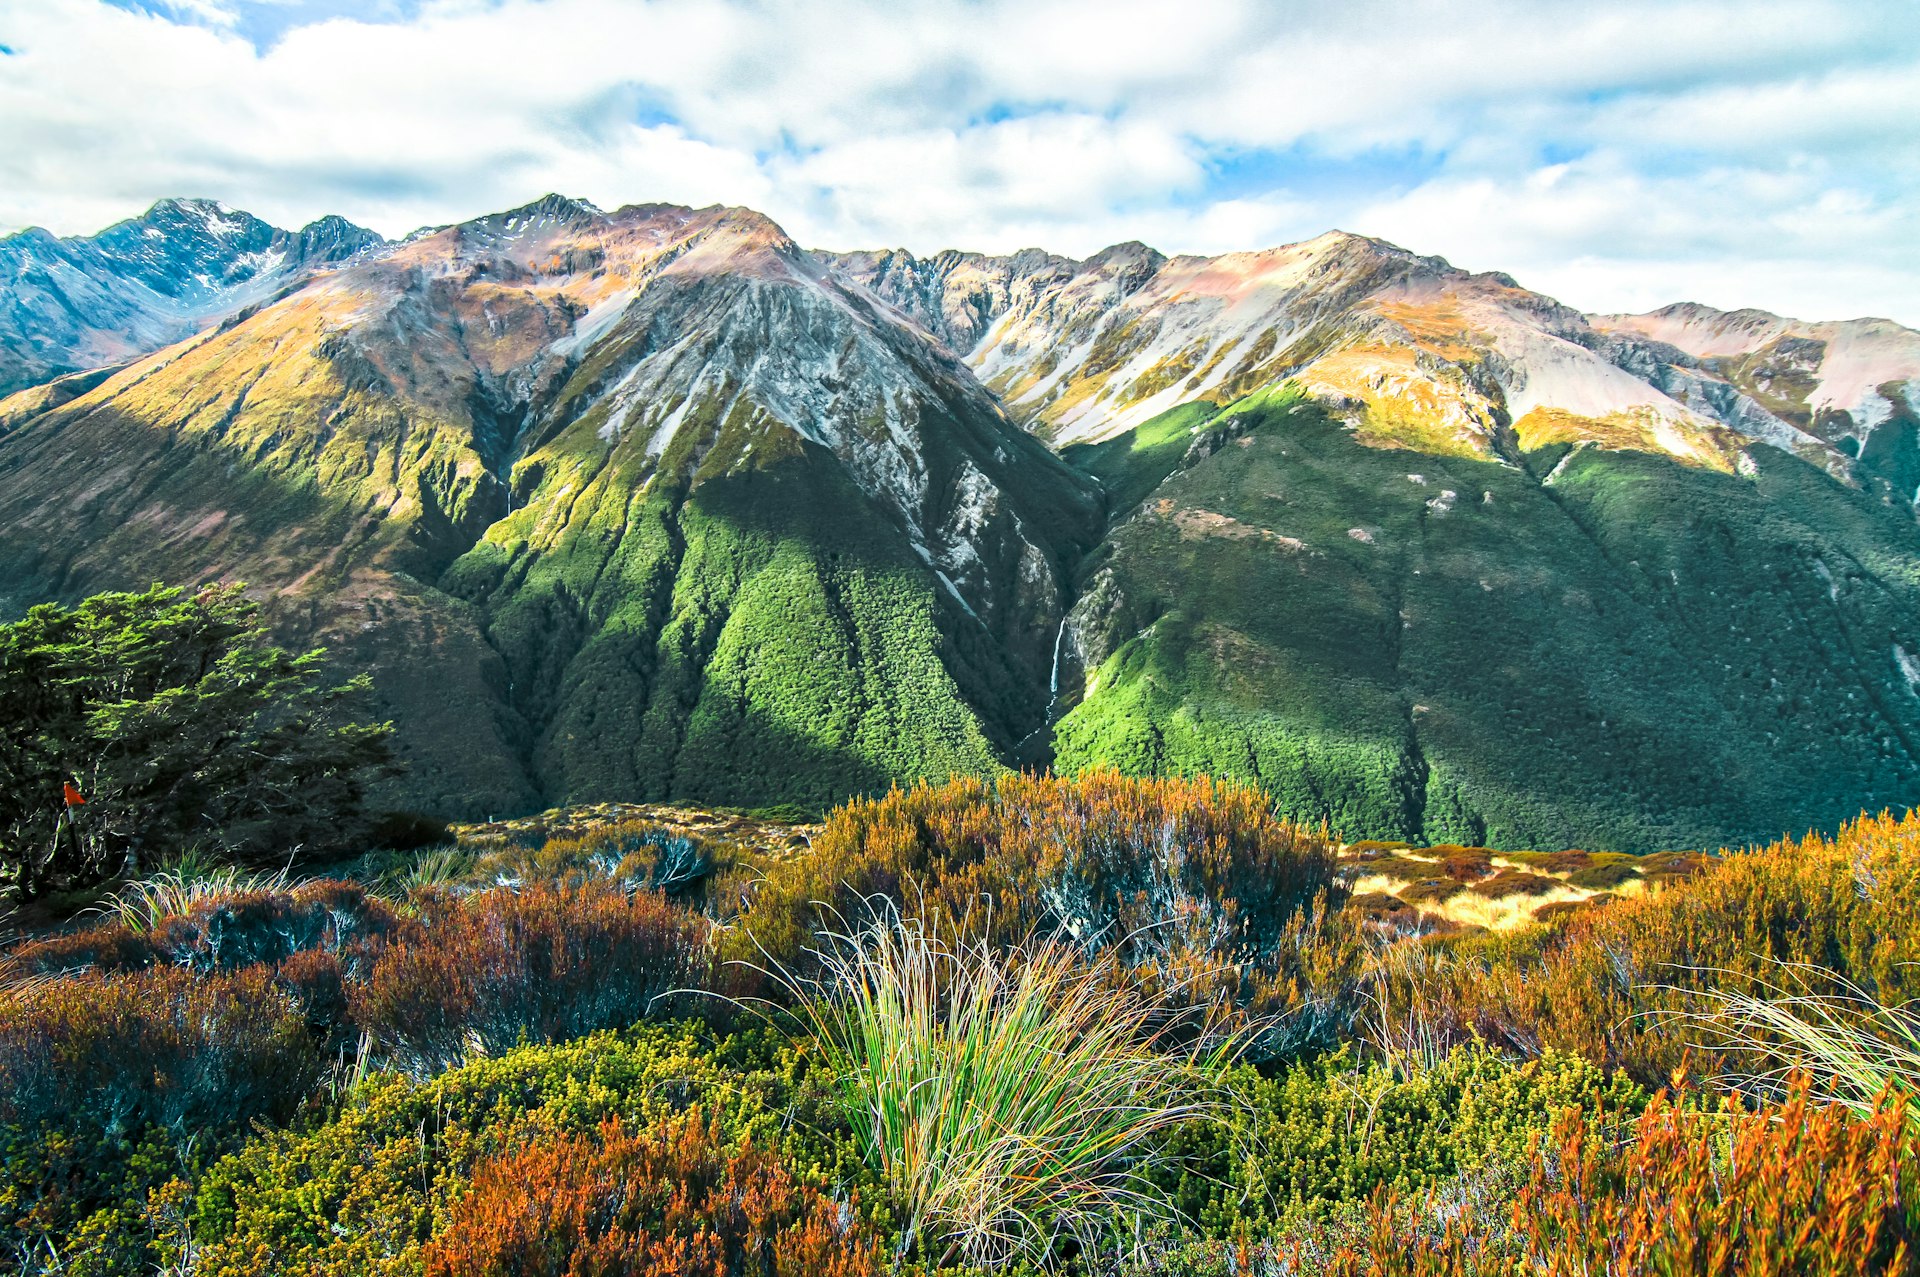 Snow-capped mountains, as seen from the trail to Avalanche Peak in Arthur's Pass National Park